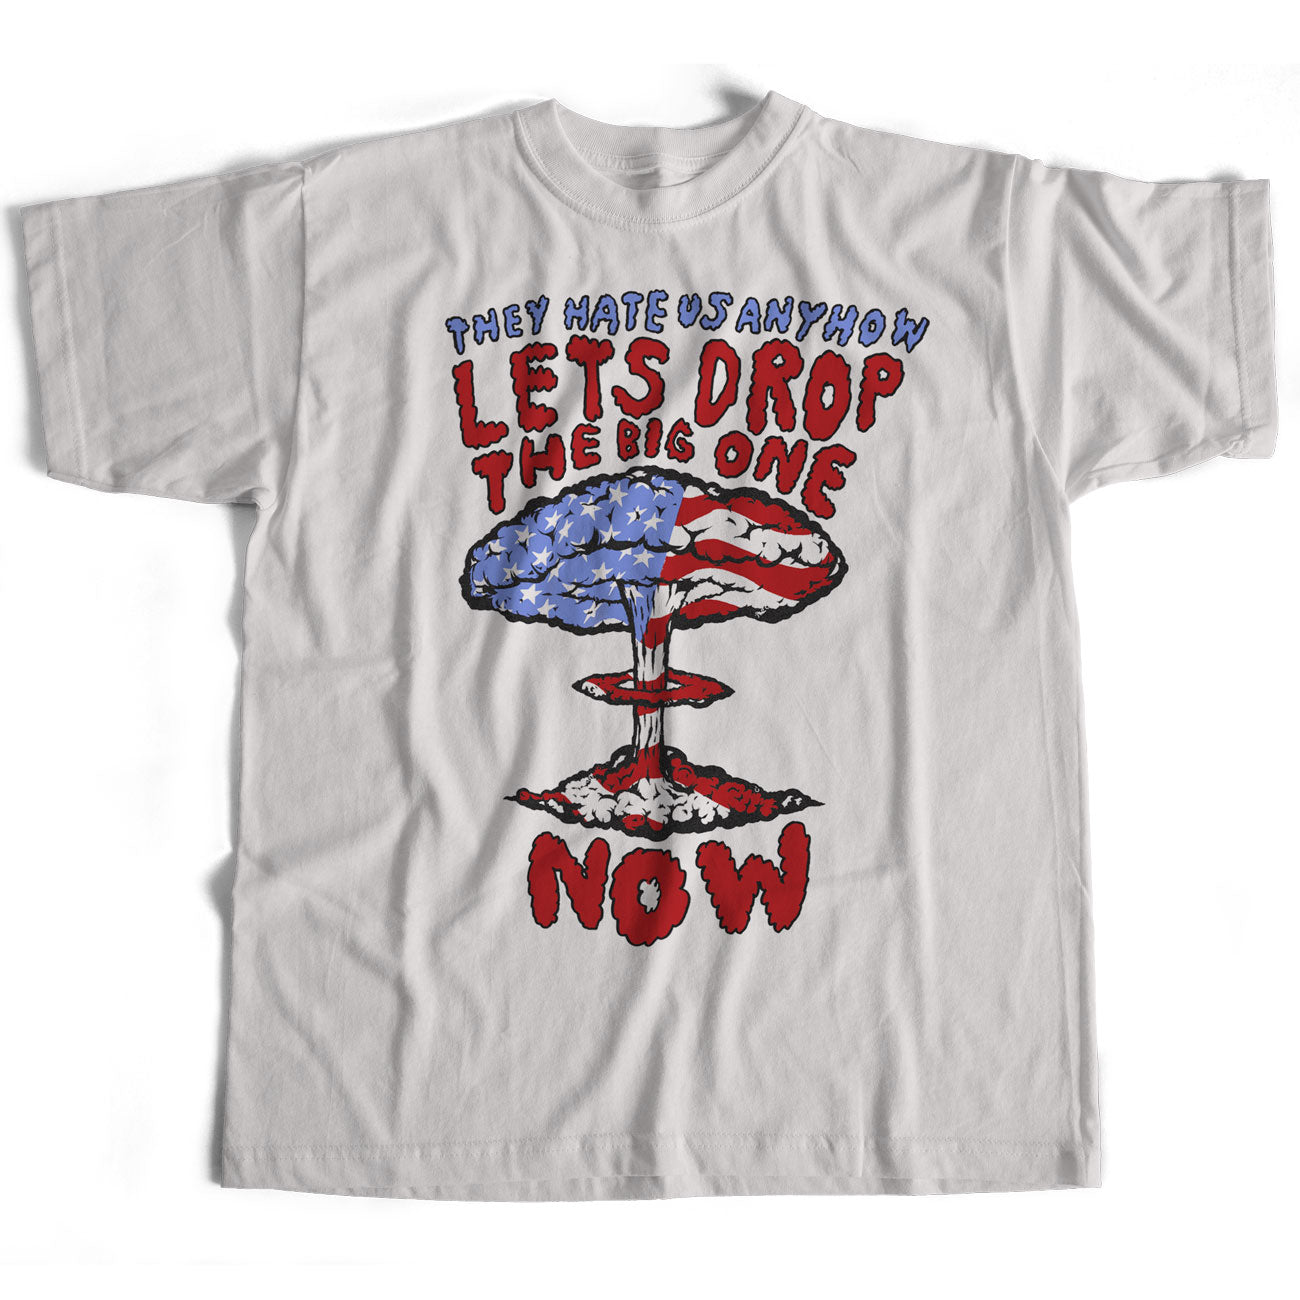 Old Skool Hooligans Inspired by Randy Newman T Shirt - Drop The Big One Now